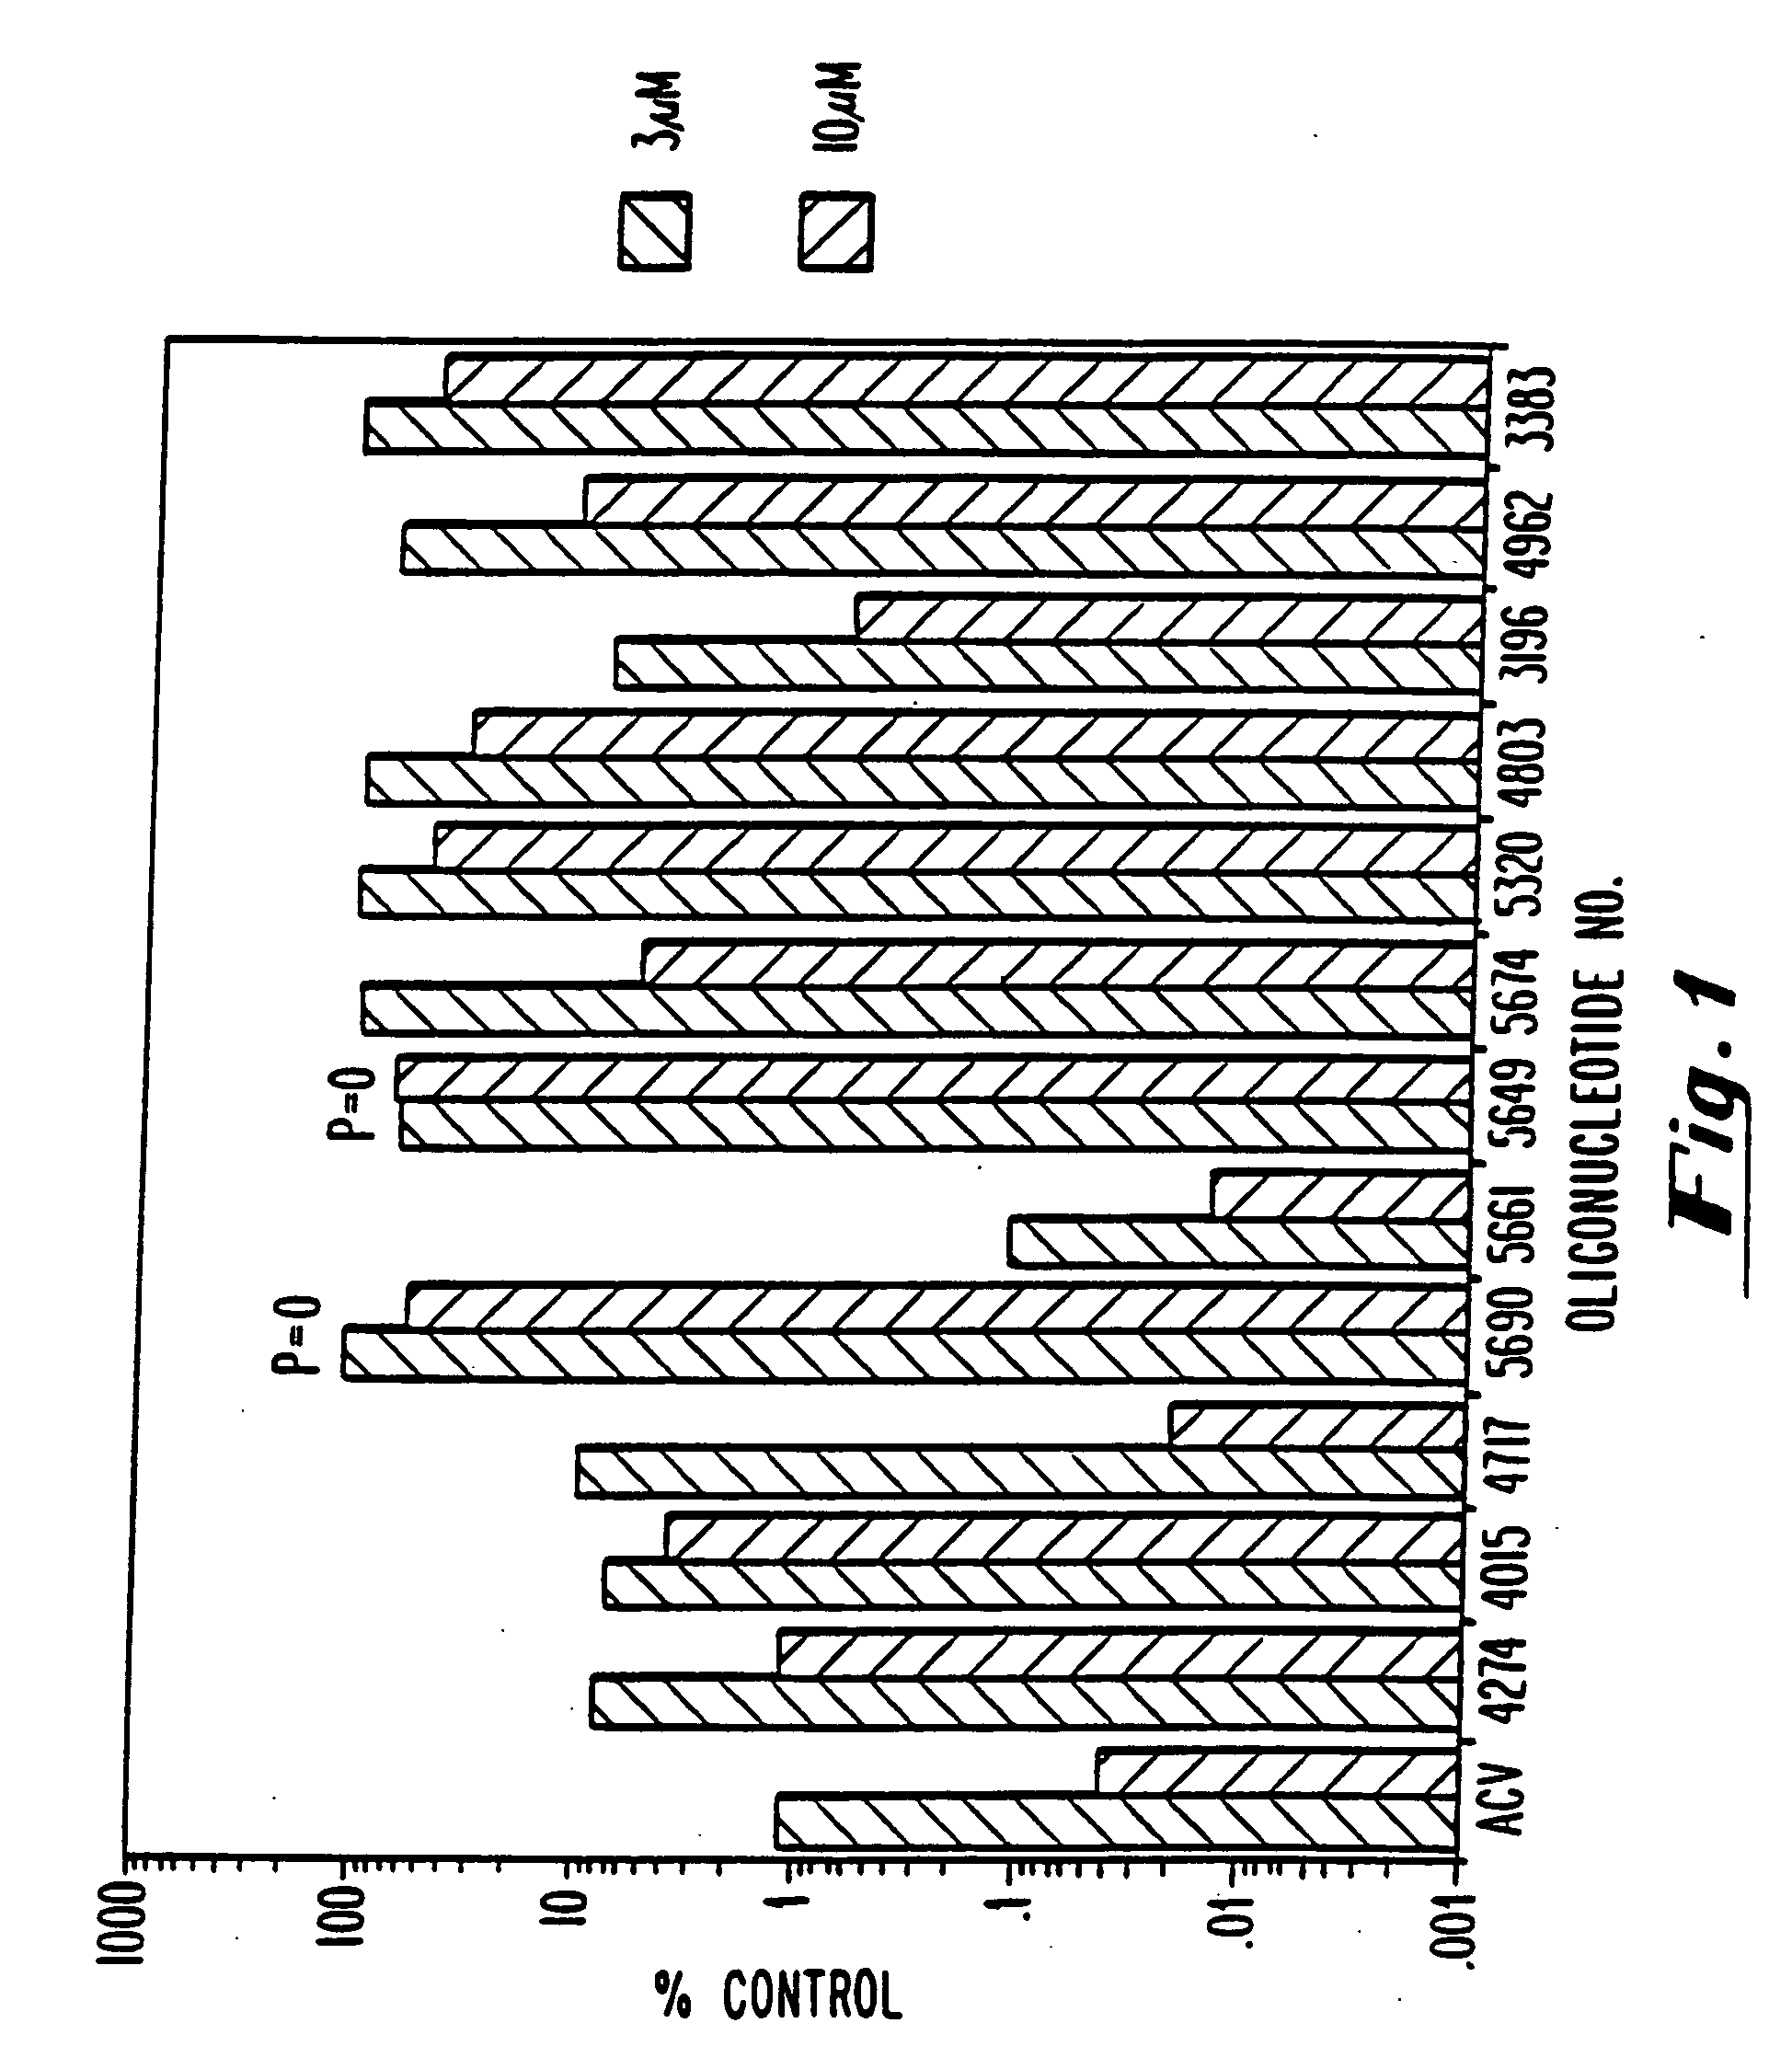 Antiviral oligonucleotides having a conserved G4 core sequence